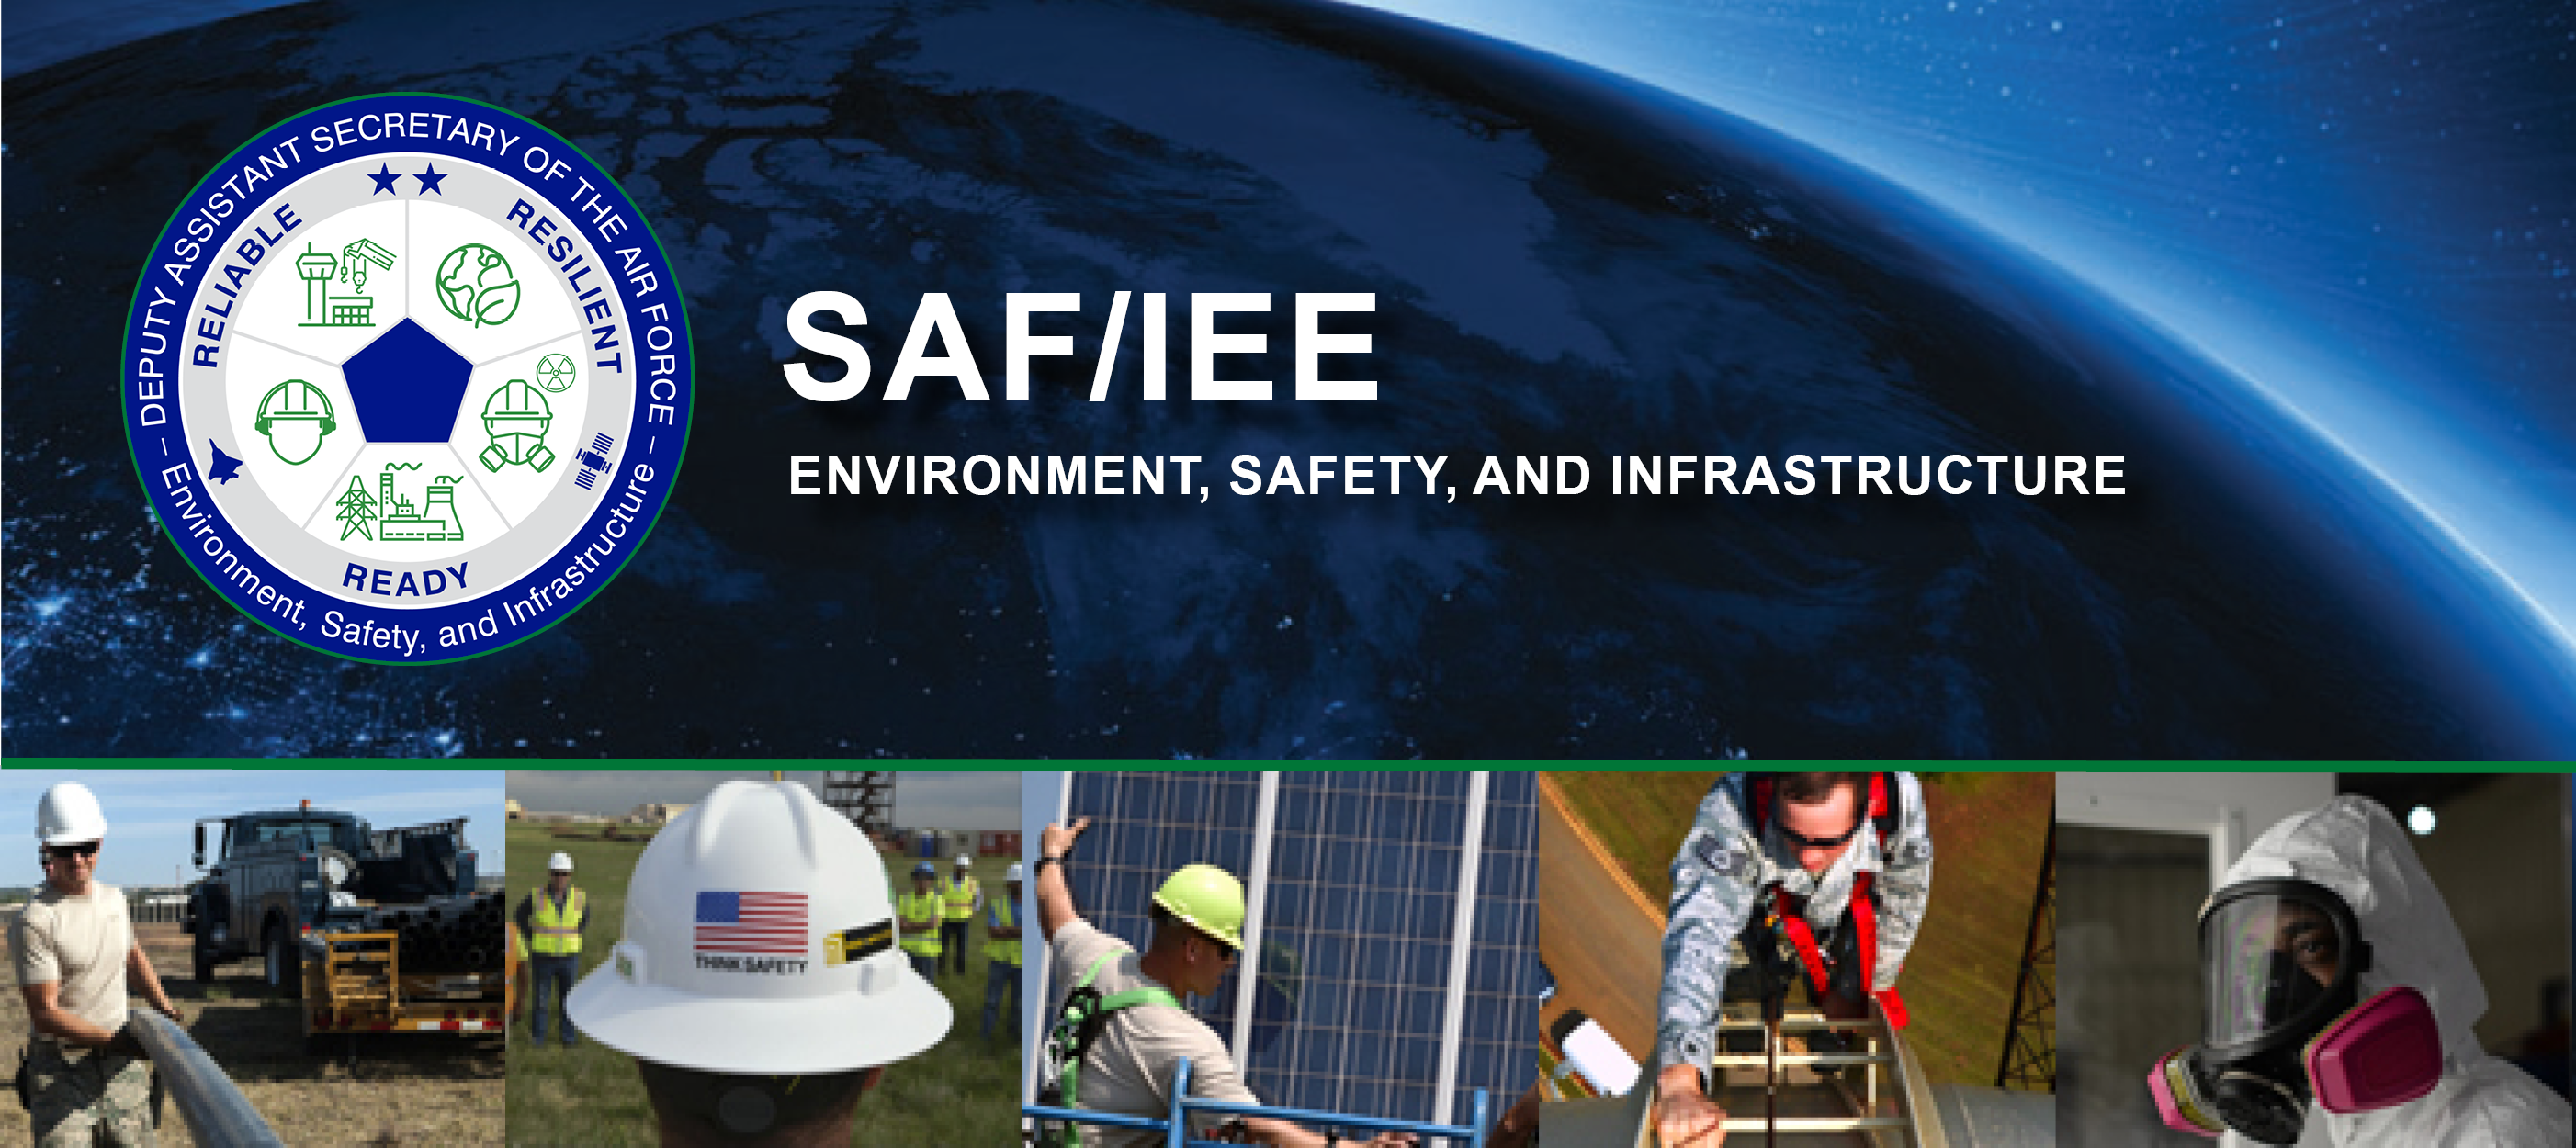 SAF/IEE - Environment, Safety & Infrastructure